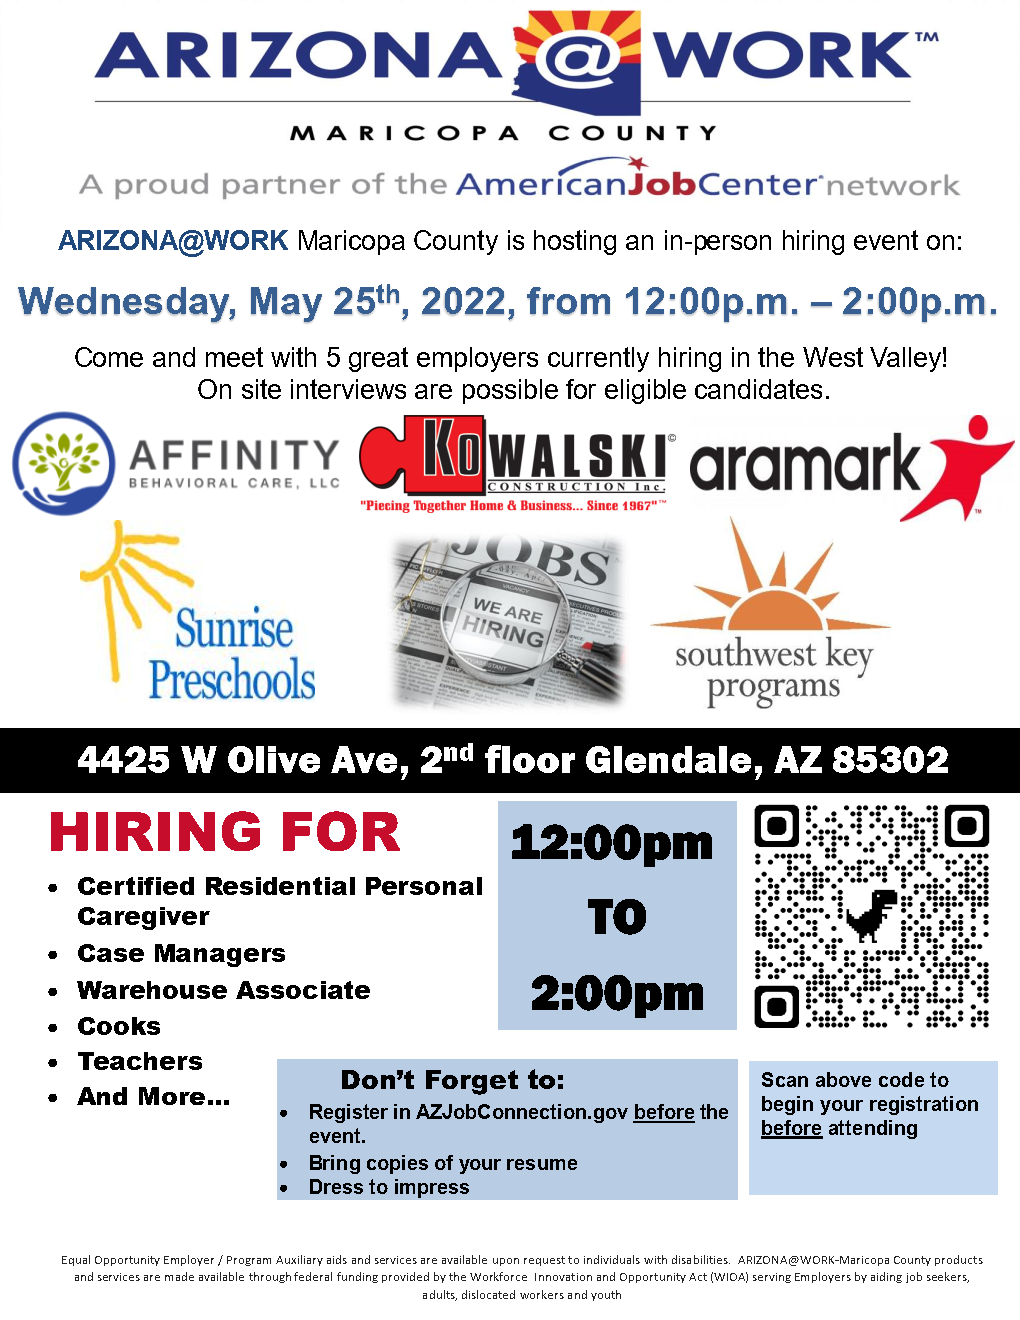 West Valley Hiring Event 05.25.2022